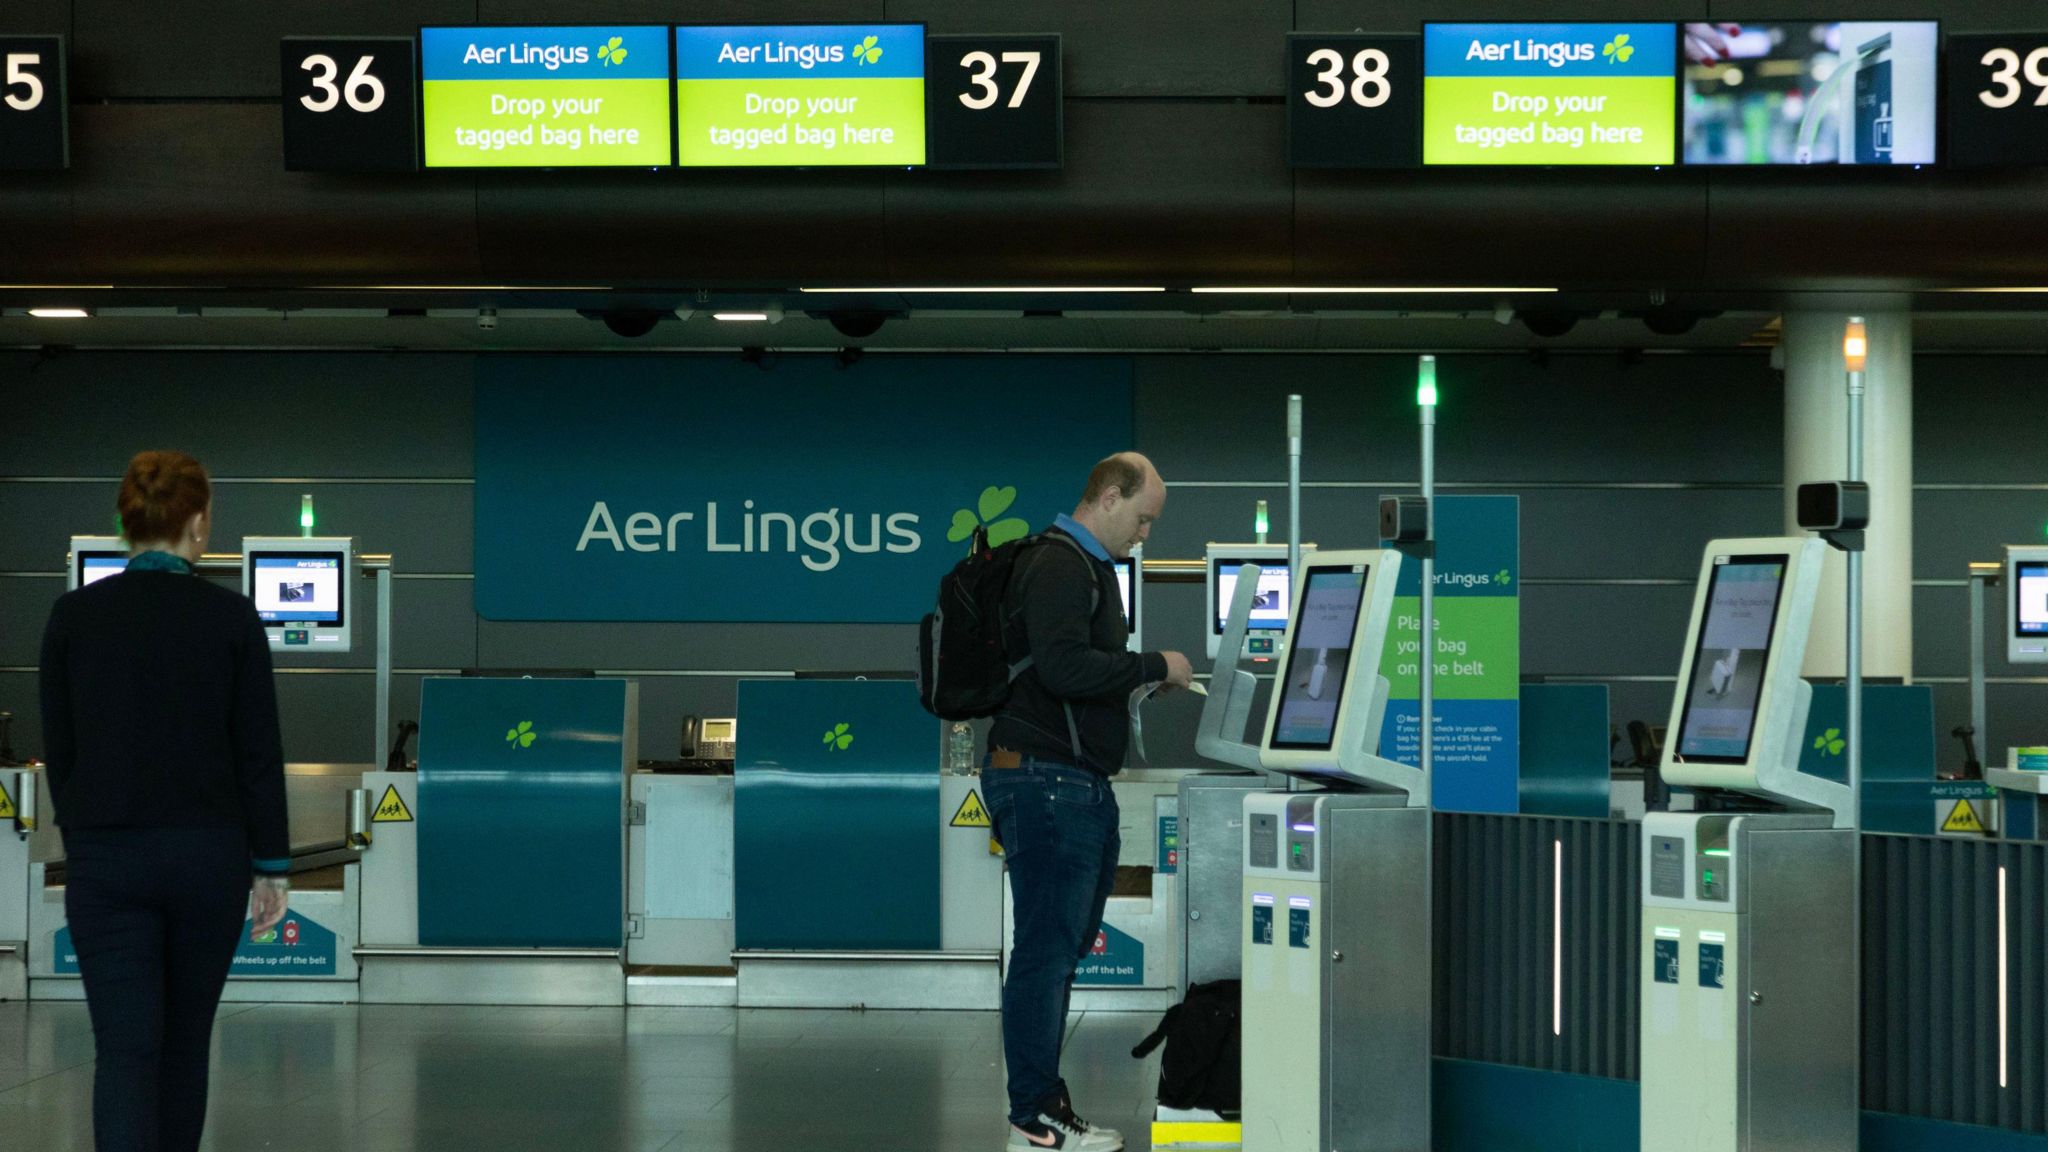 One passenger and one staff member in a near empty Aer Lingus Check-in Desk area at Dublin Airport 